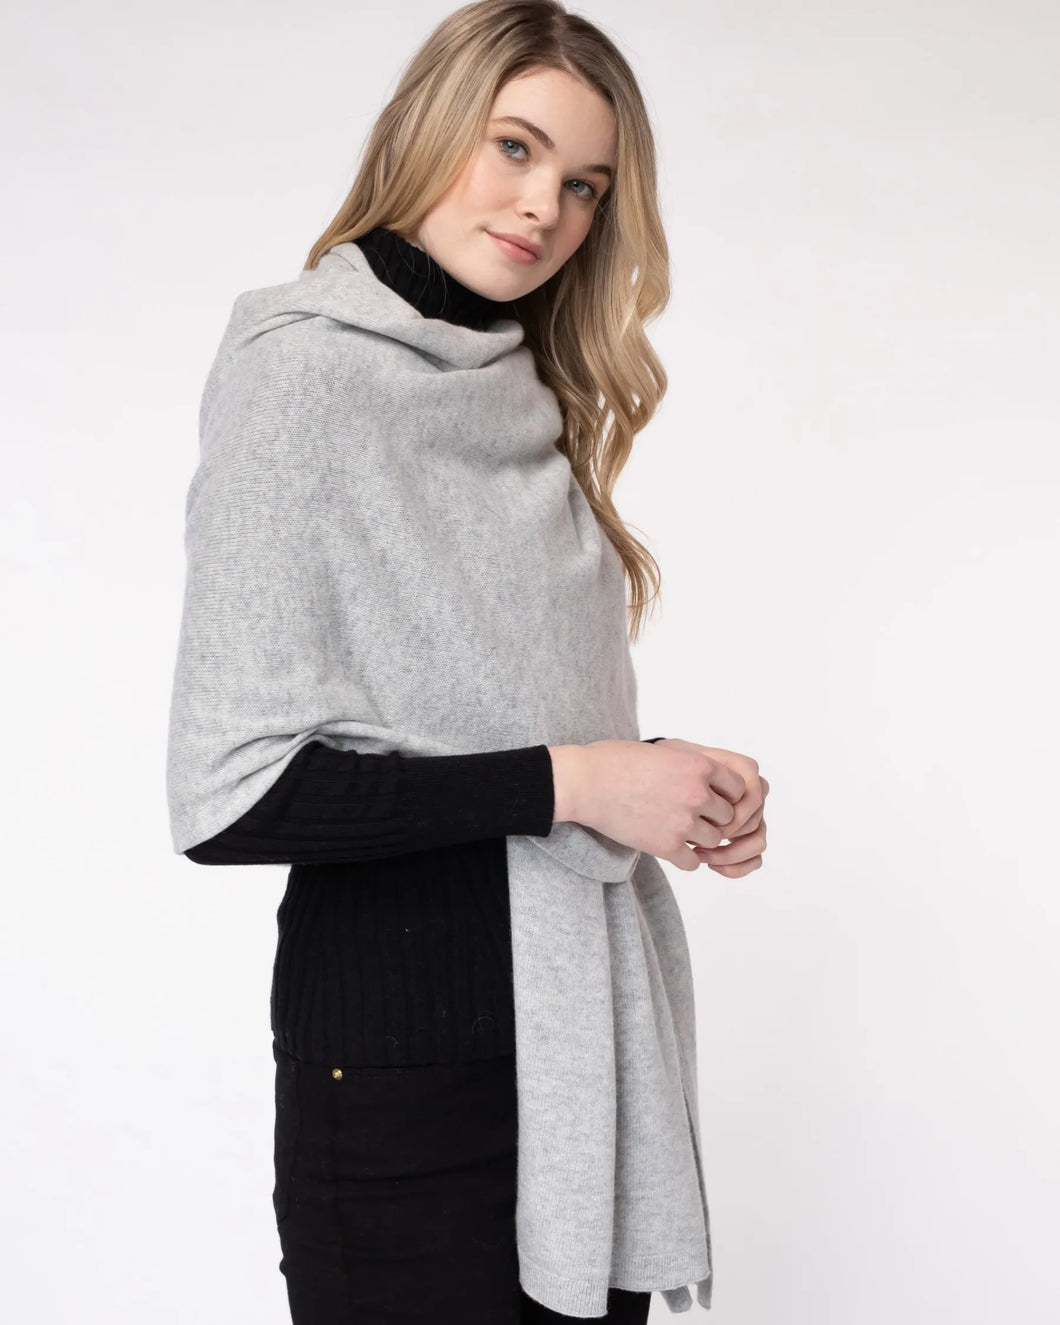 Alashan Luxe Cashmere Travel Wrap